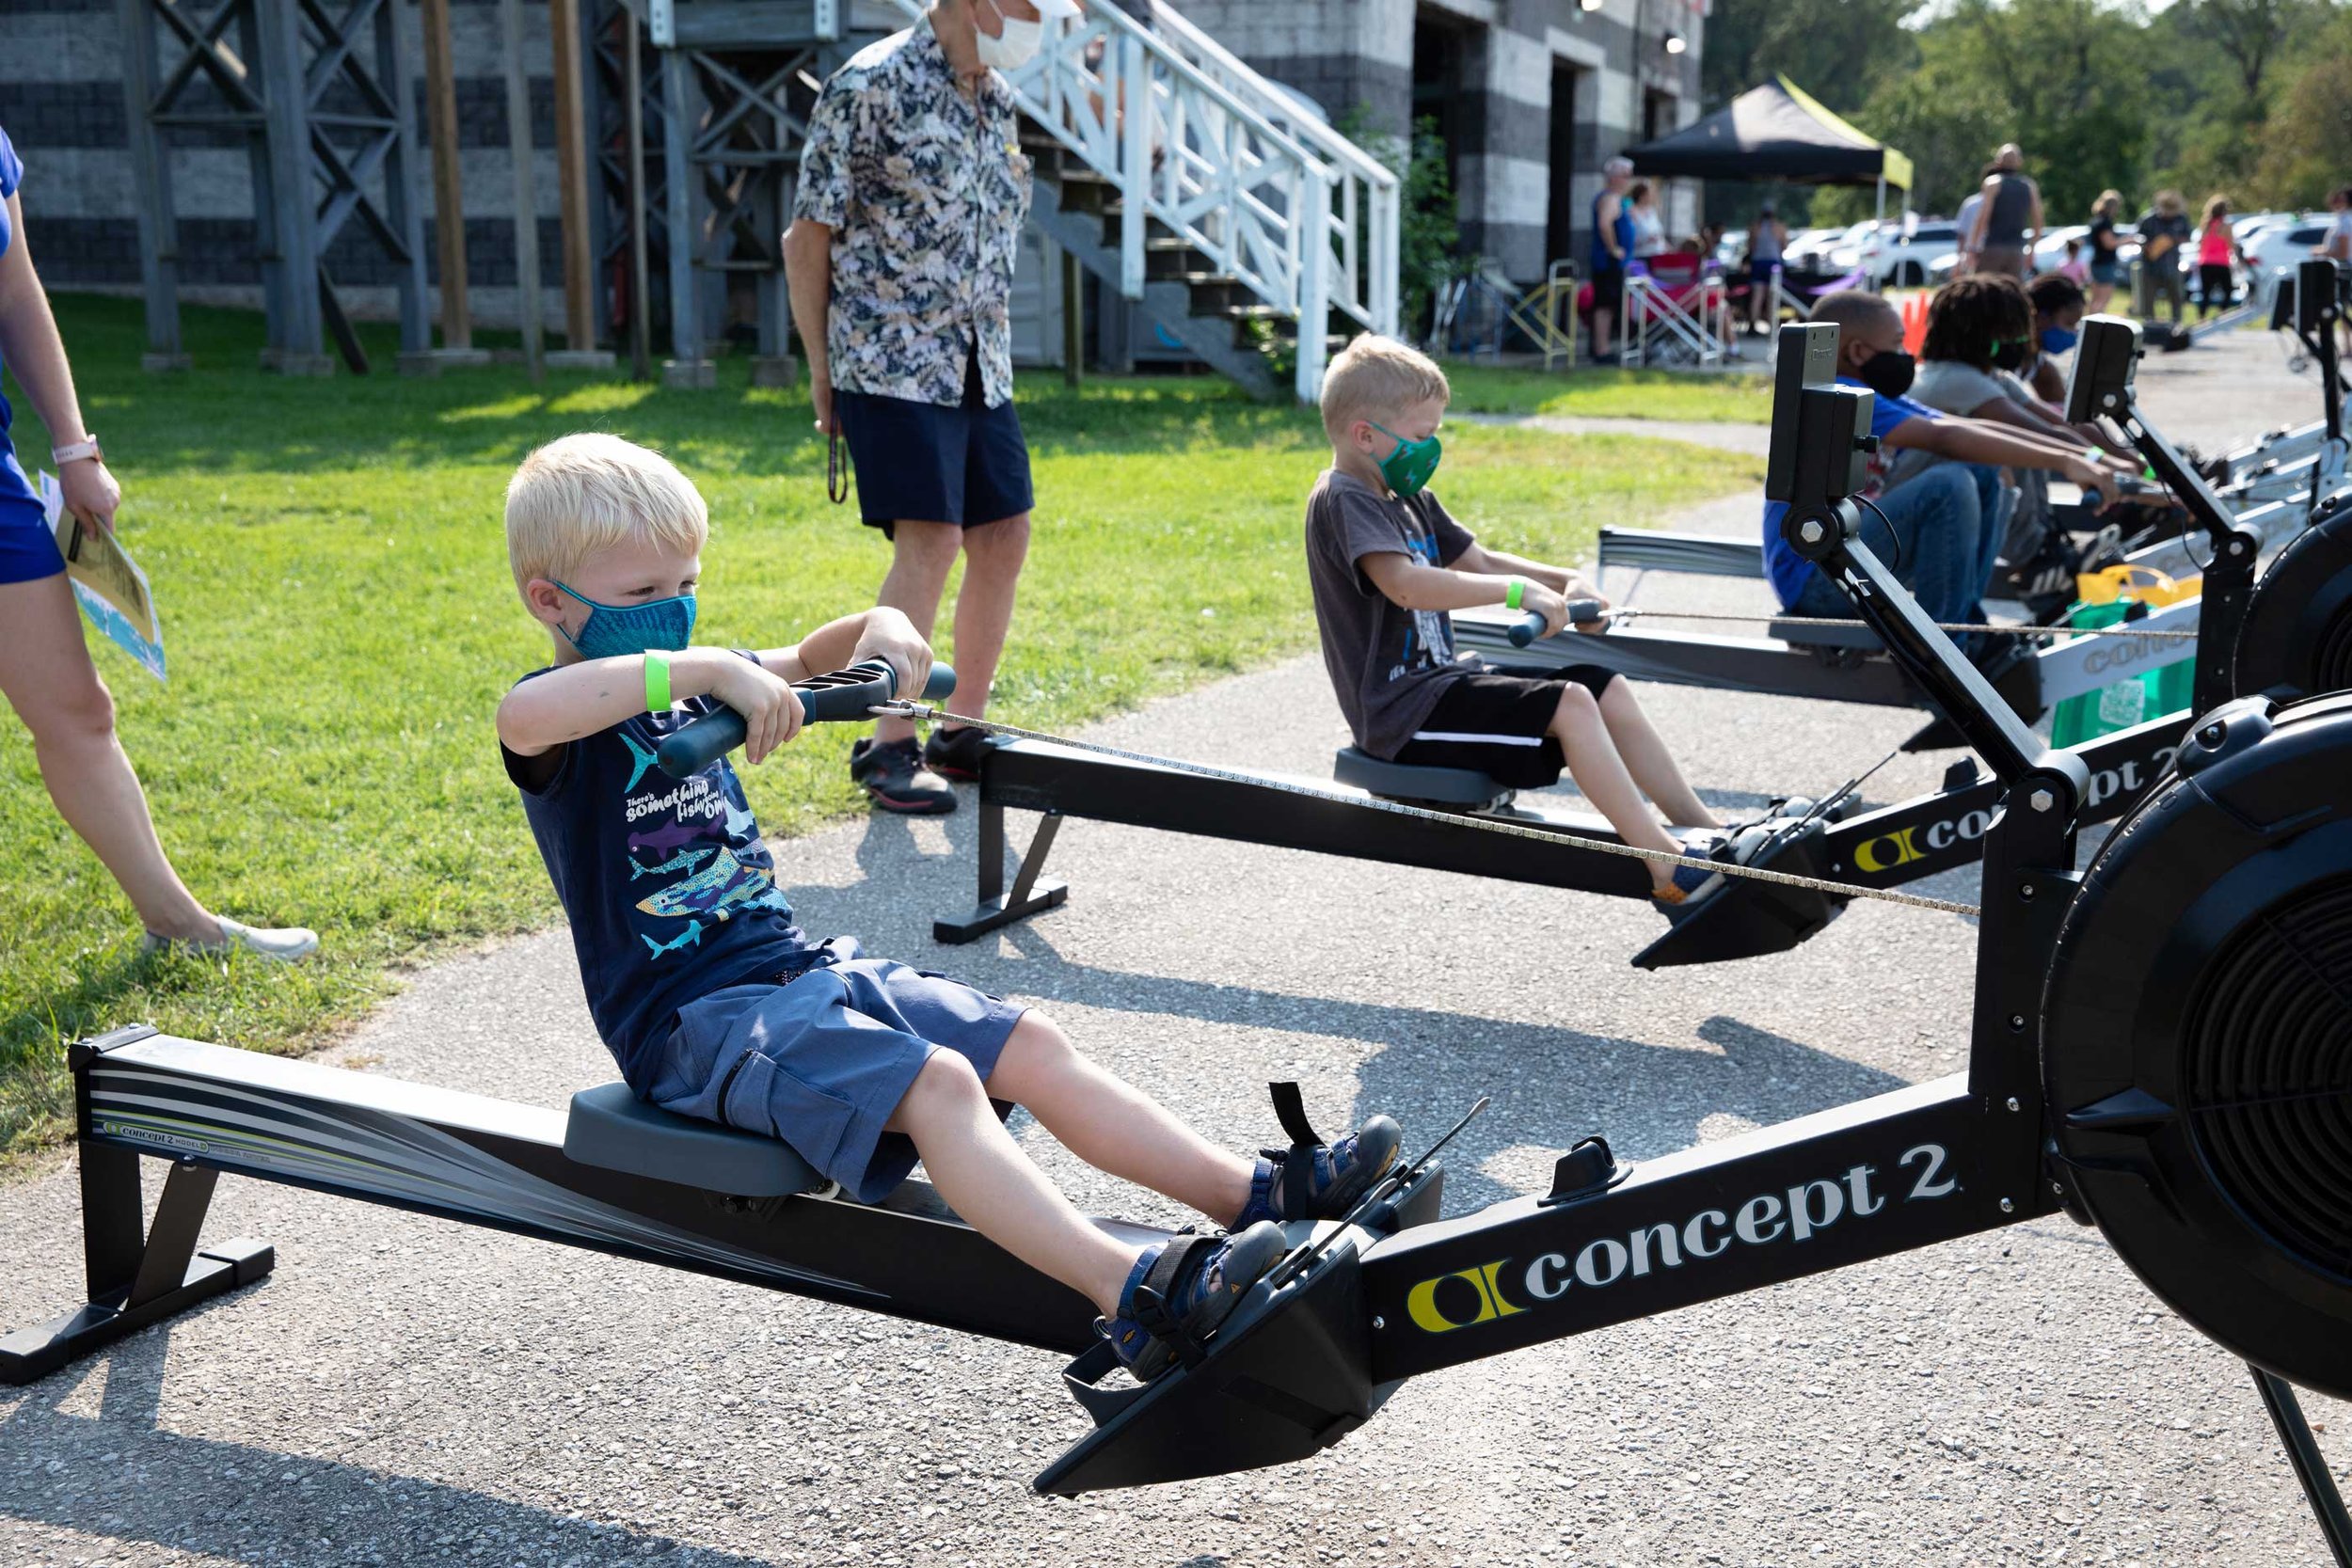  Kids practice using rowing machines outside 